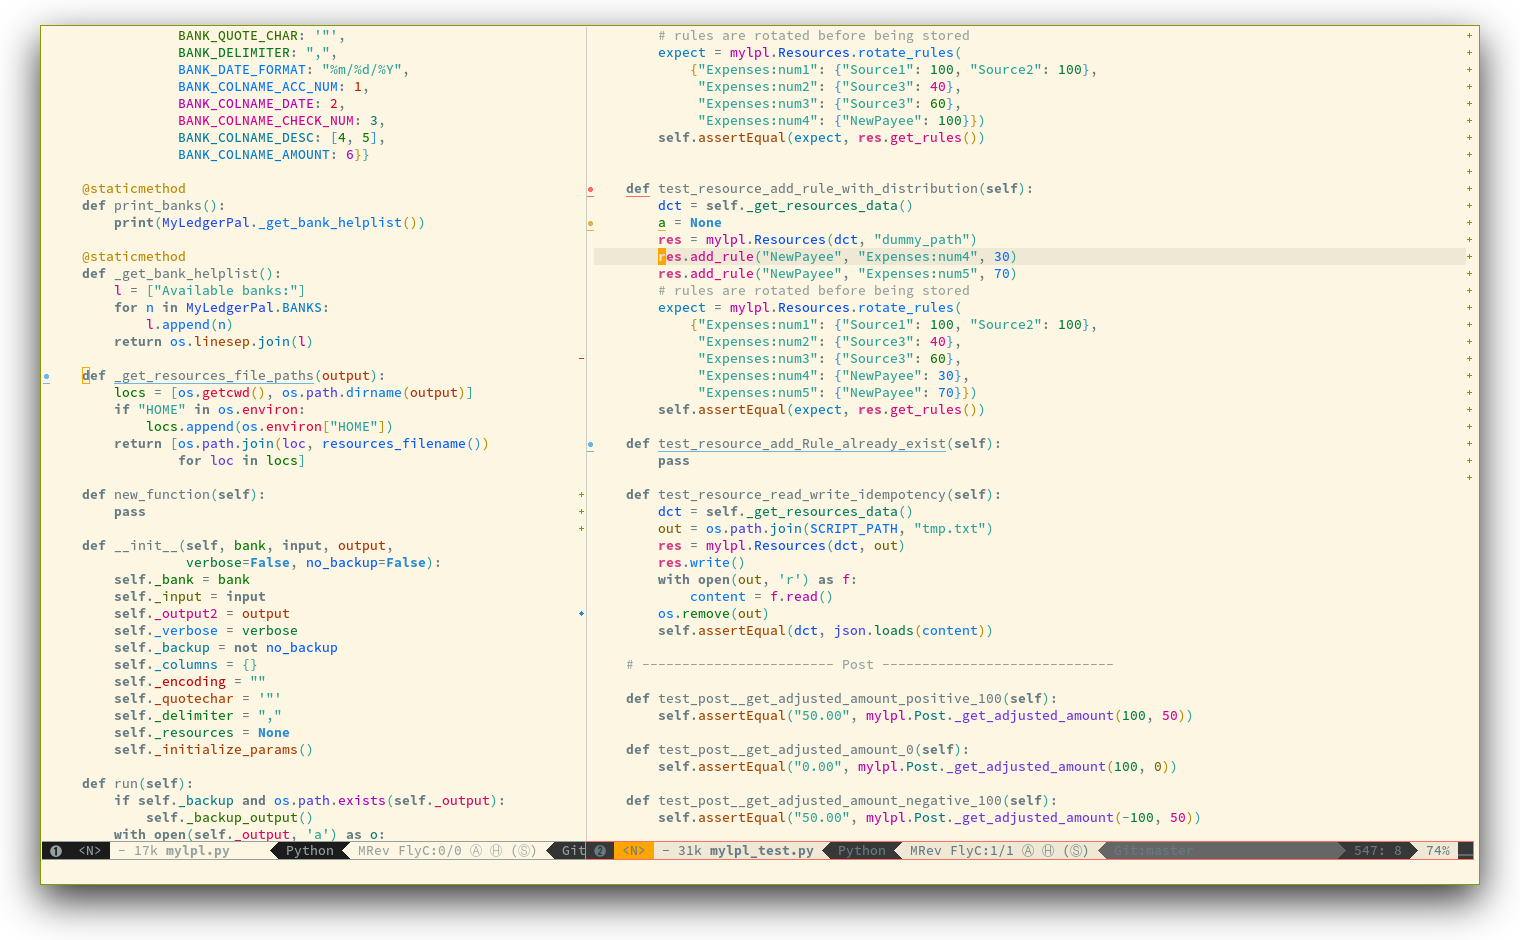 /TakeV/spacemacs/media/commit/1070d4b56a0c839a6ab4bc07fca325481e404f86/layers/colors/img/theme-tweaks-python.png